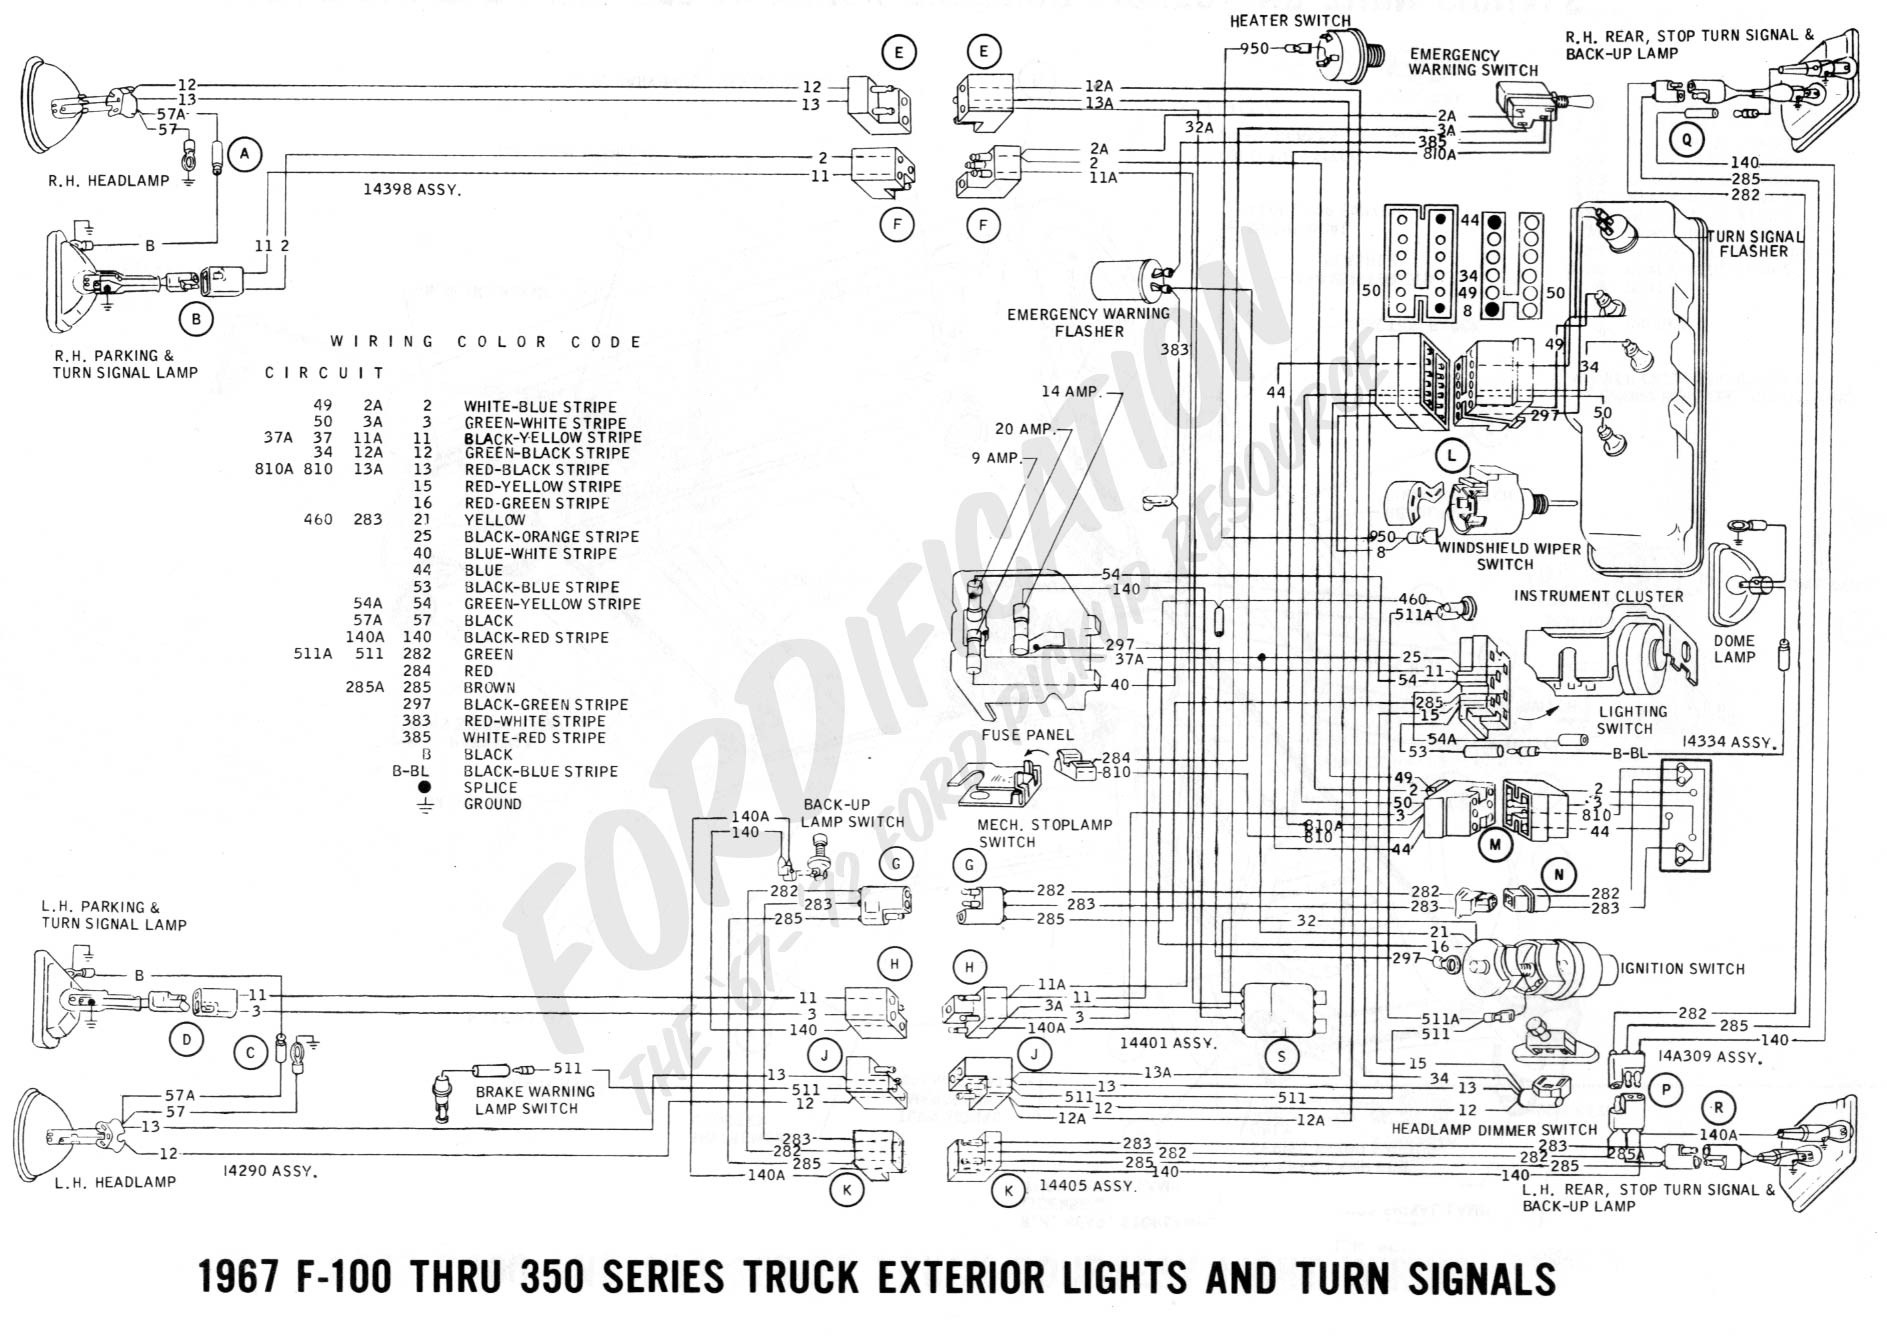 Turn Signal Circuit Diagram ford Truck Technical Drawings and Schematics Section H Wiring Of Turn Signal Circuit Diagram